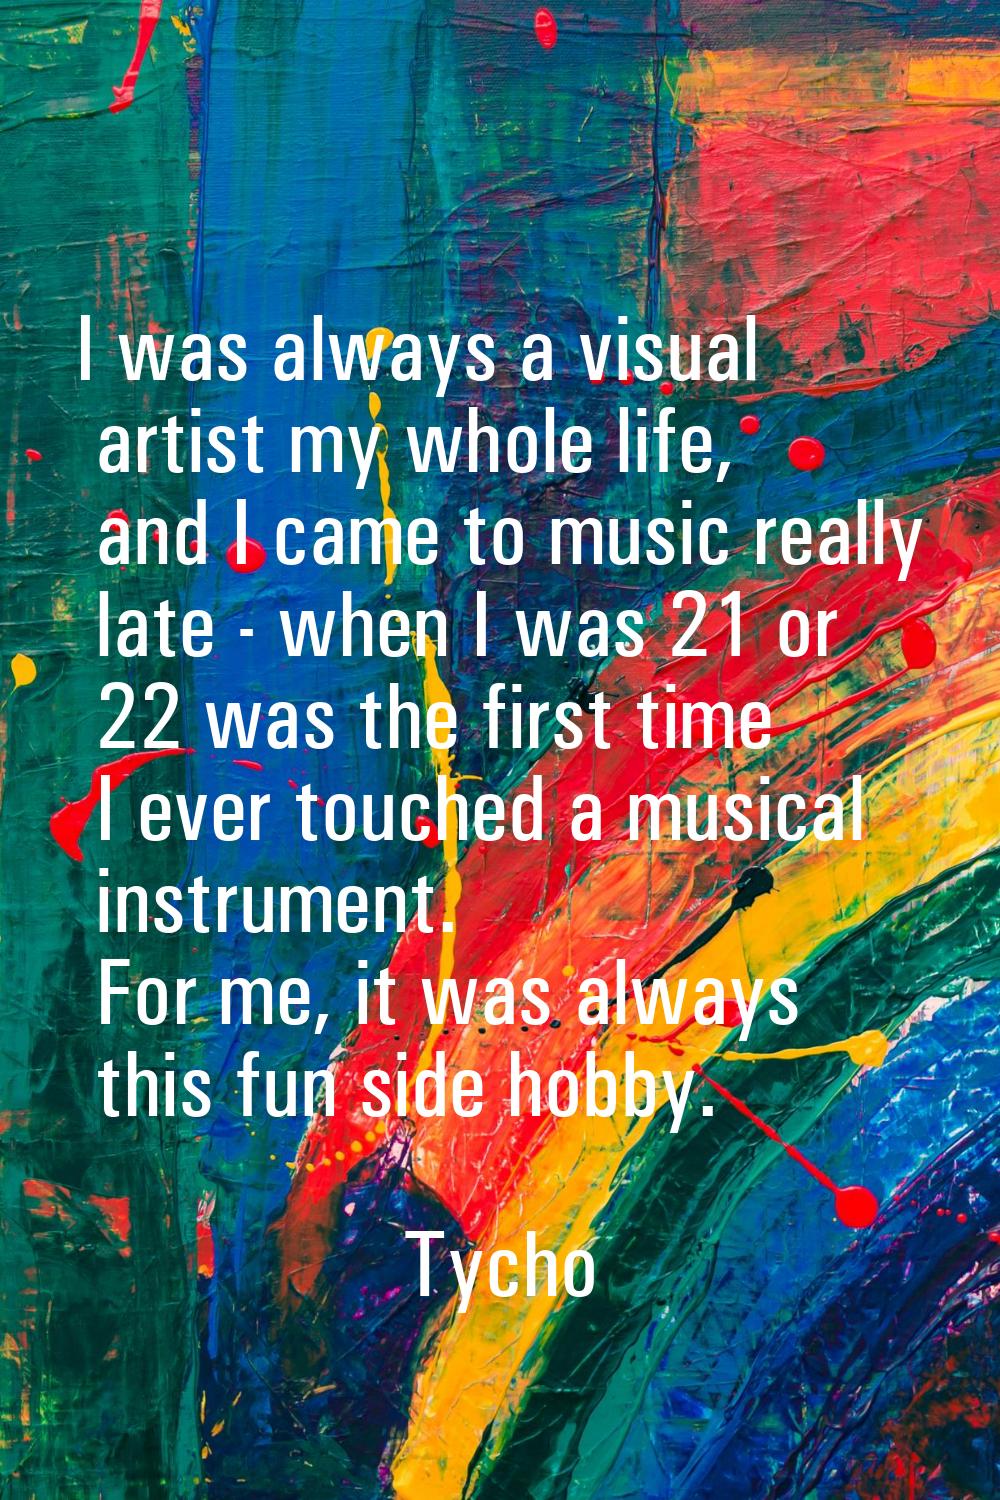 I was always a visual artist my whole life, and I came to music really late - when I was 21 or 22 w